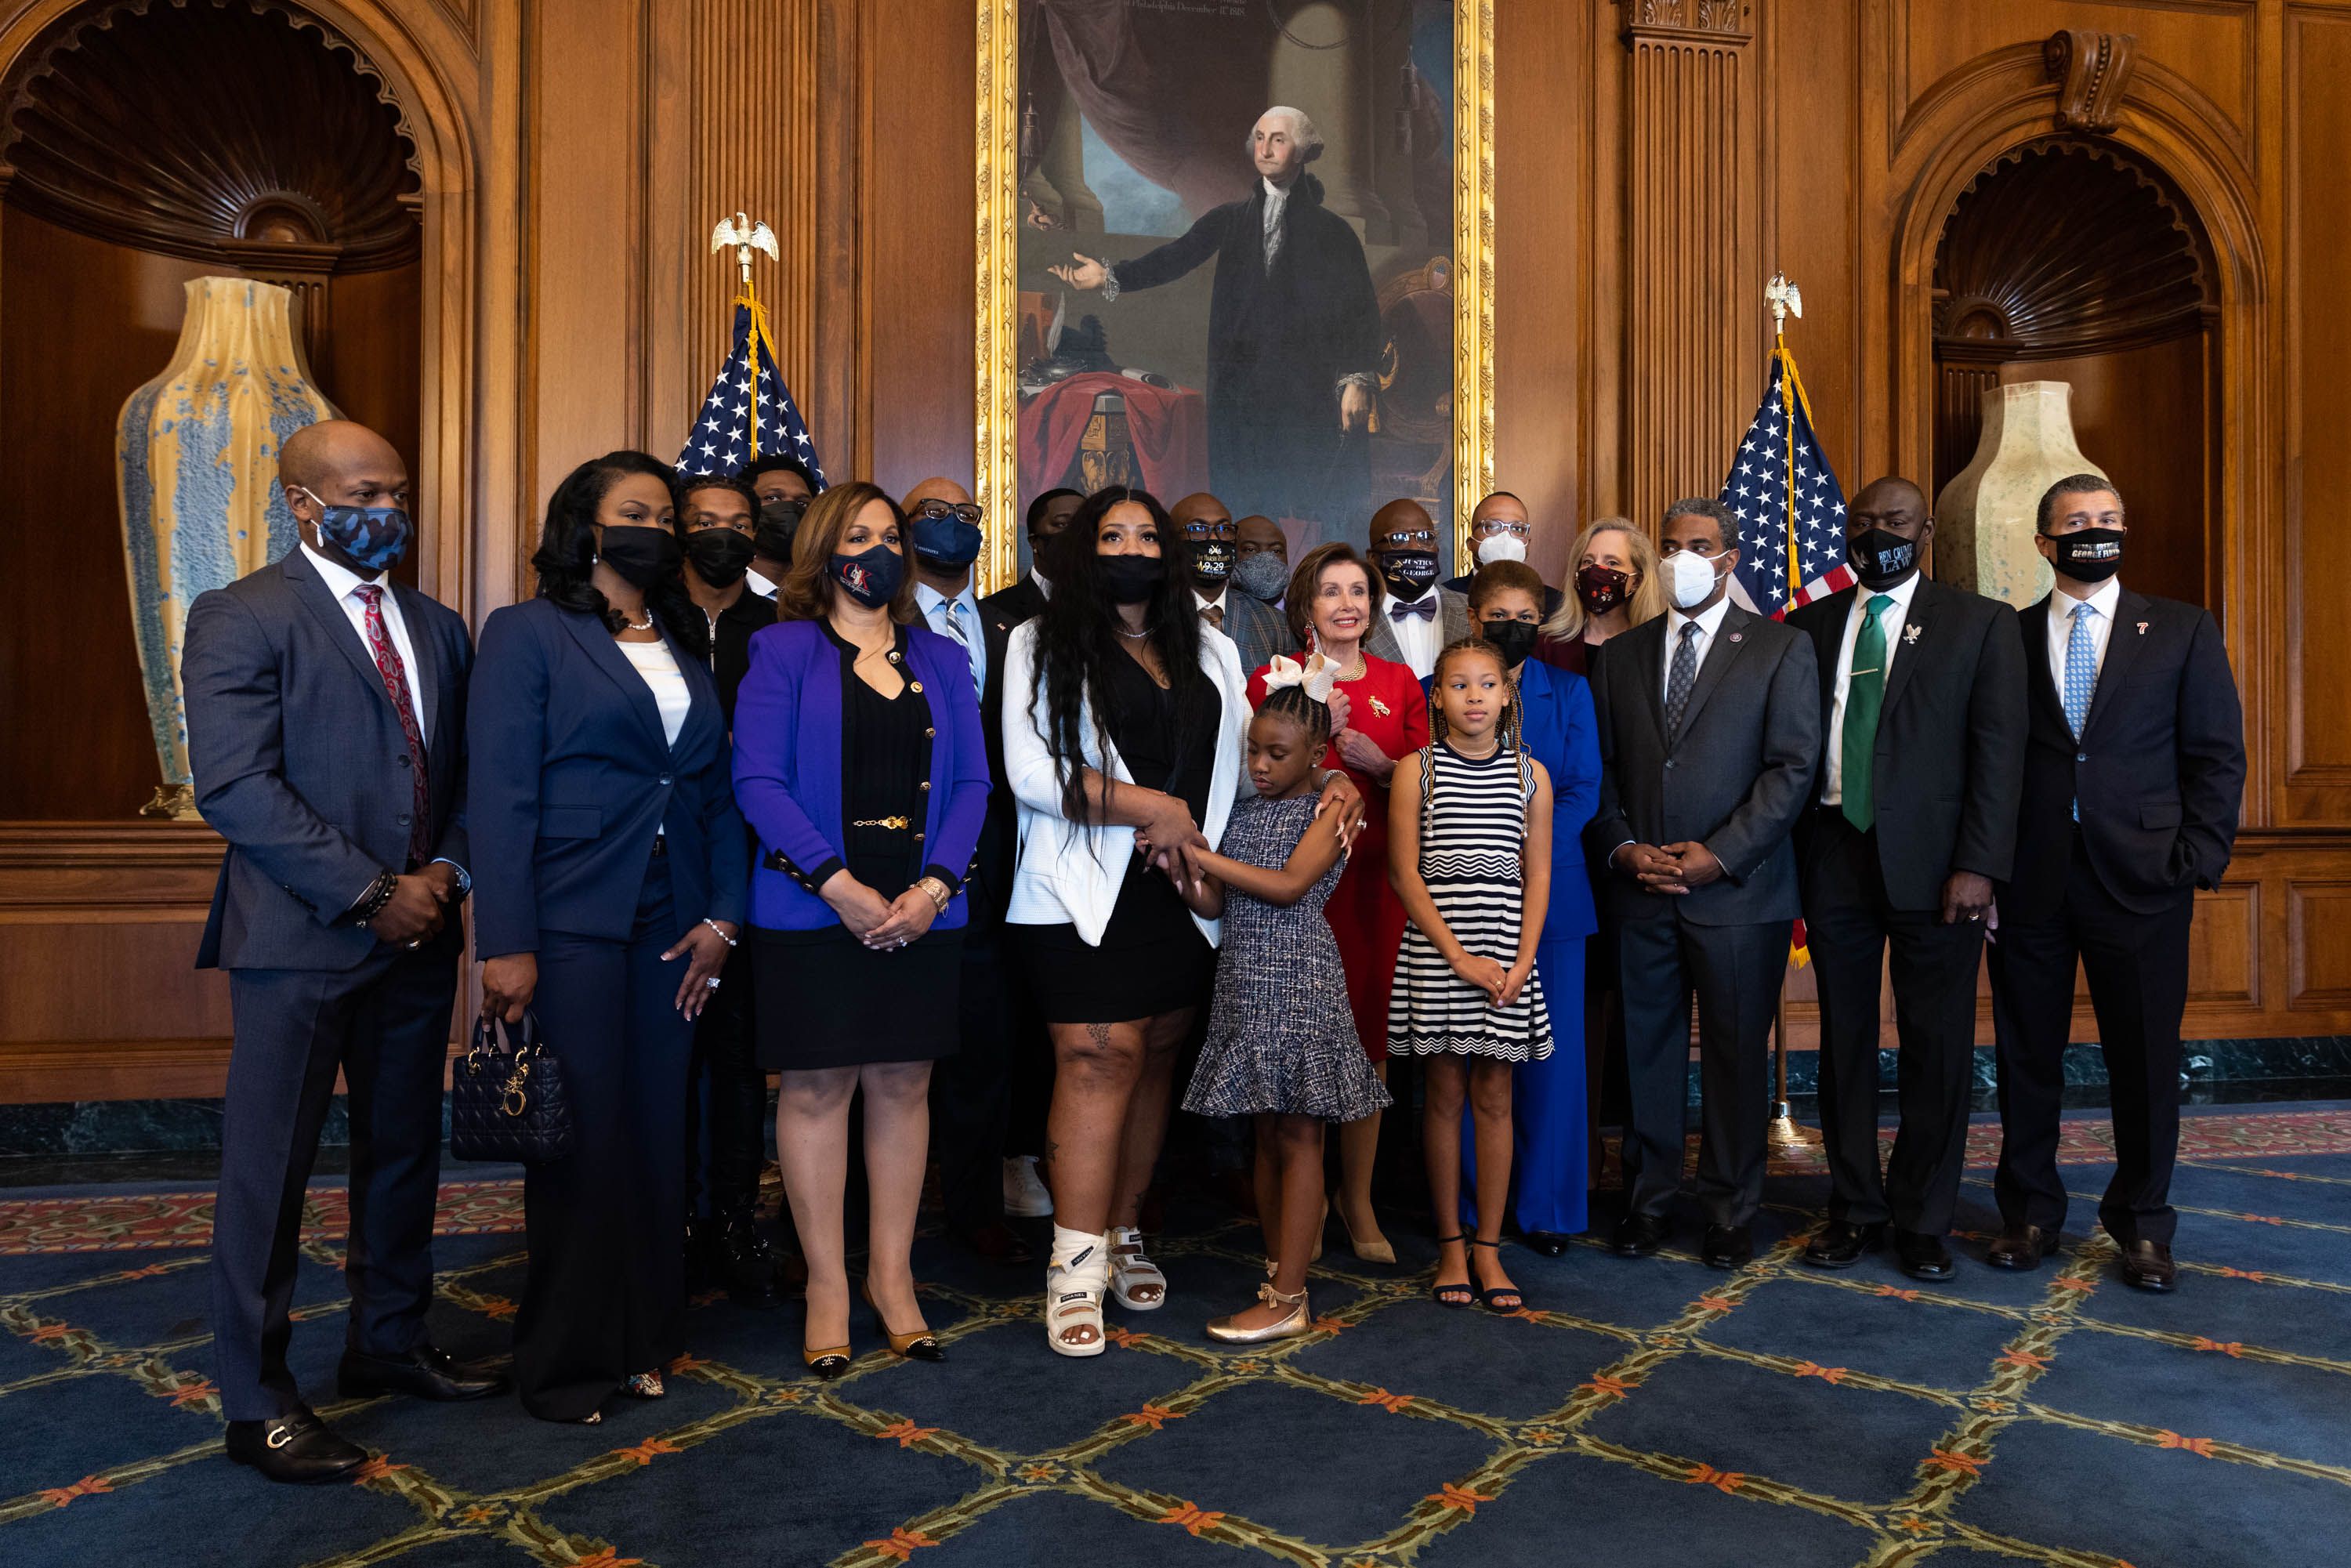 House Speaker Nancy Pelosi, D-CA, stands with members of the Floyd family prior to a meeting to mark the anniversary of the death of George Floyd, on May 25, 2021 at the U.S. Capitol